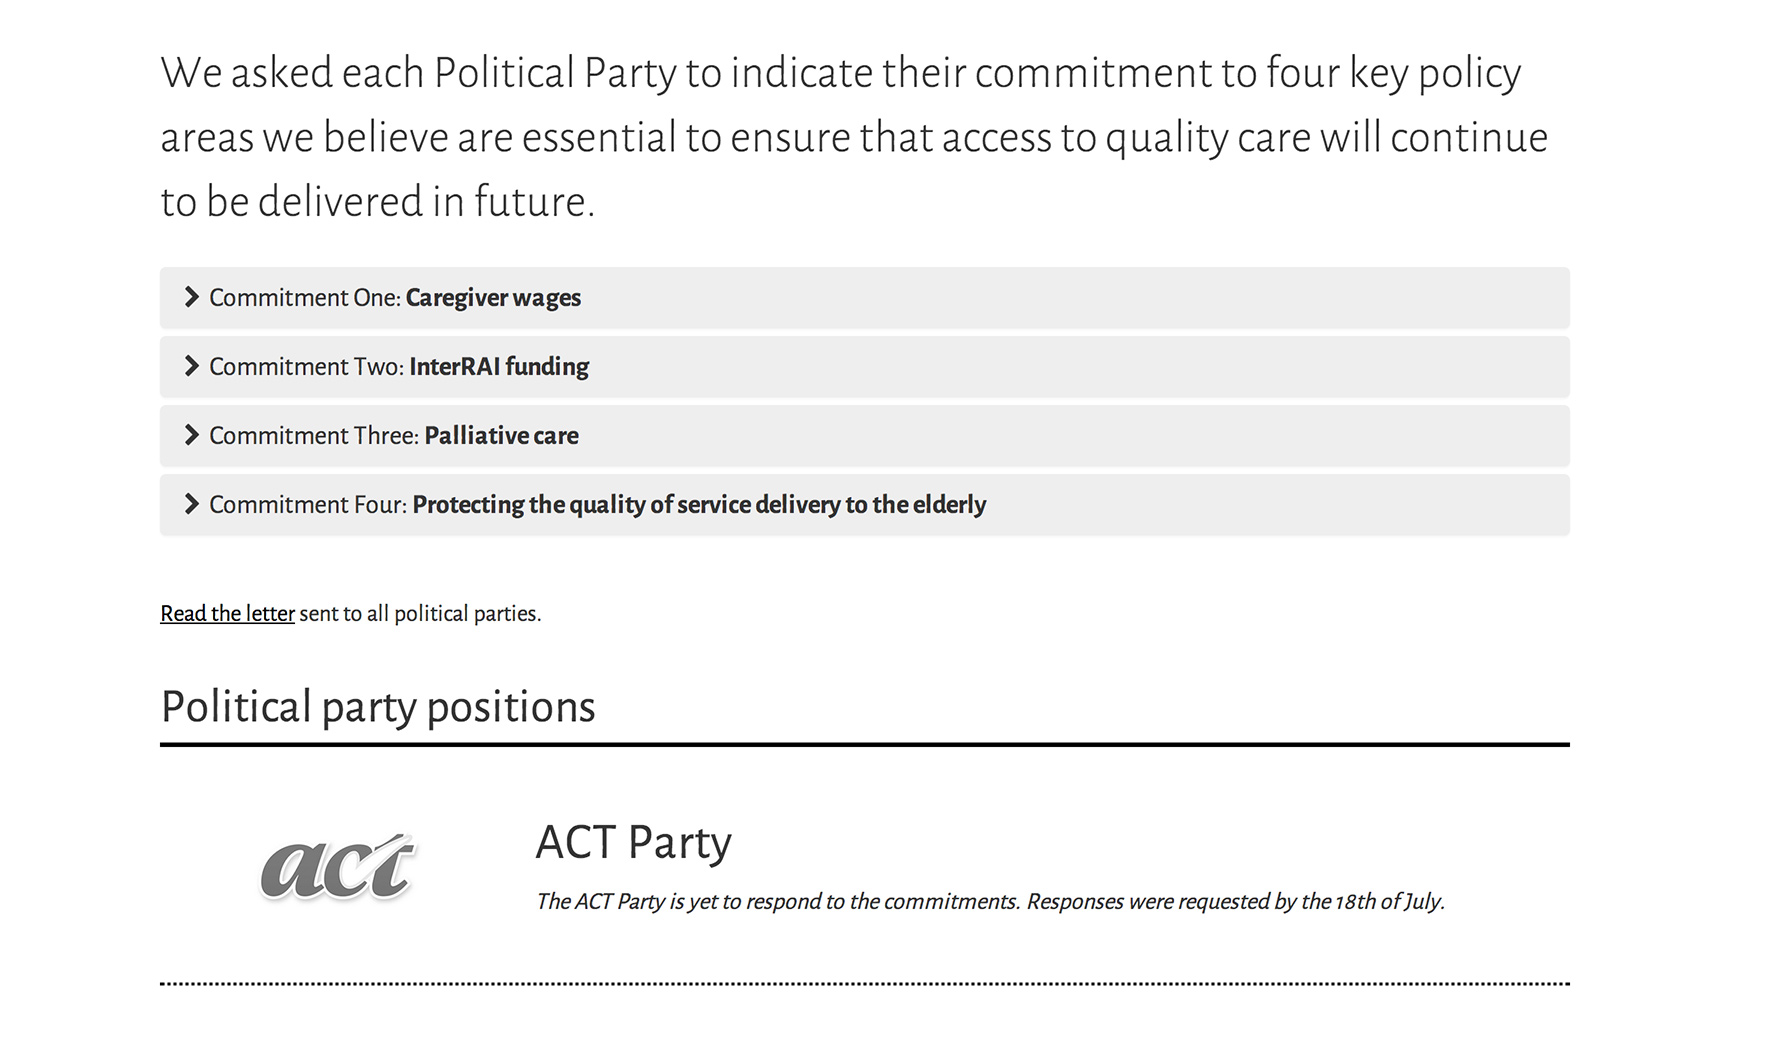 Political party responses page